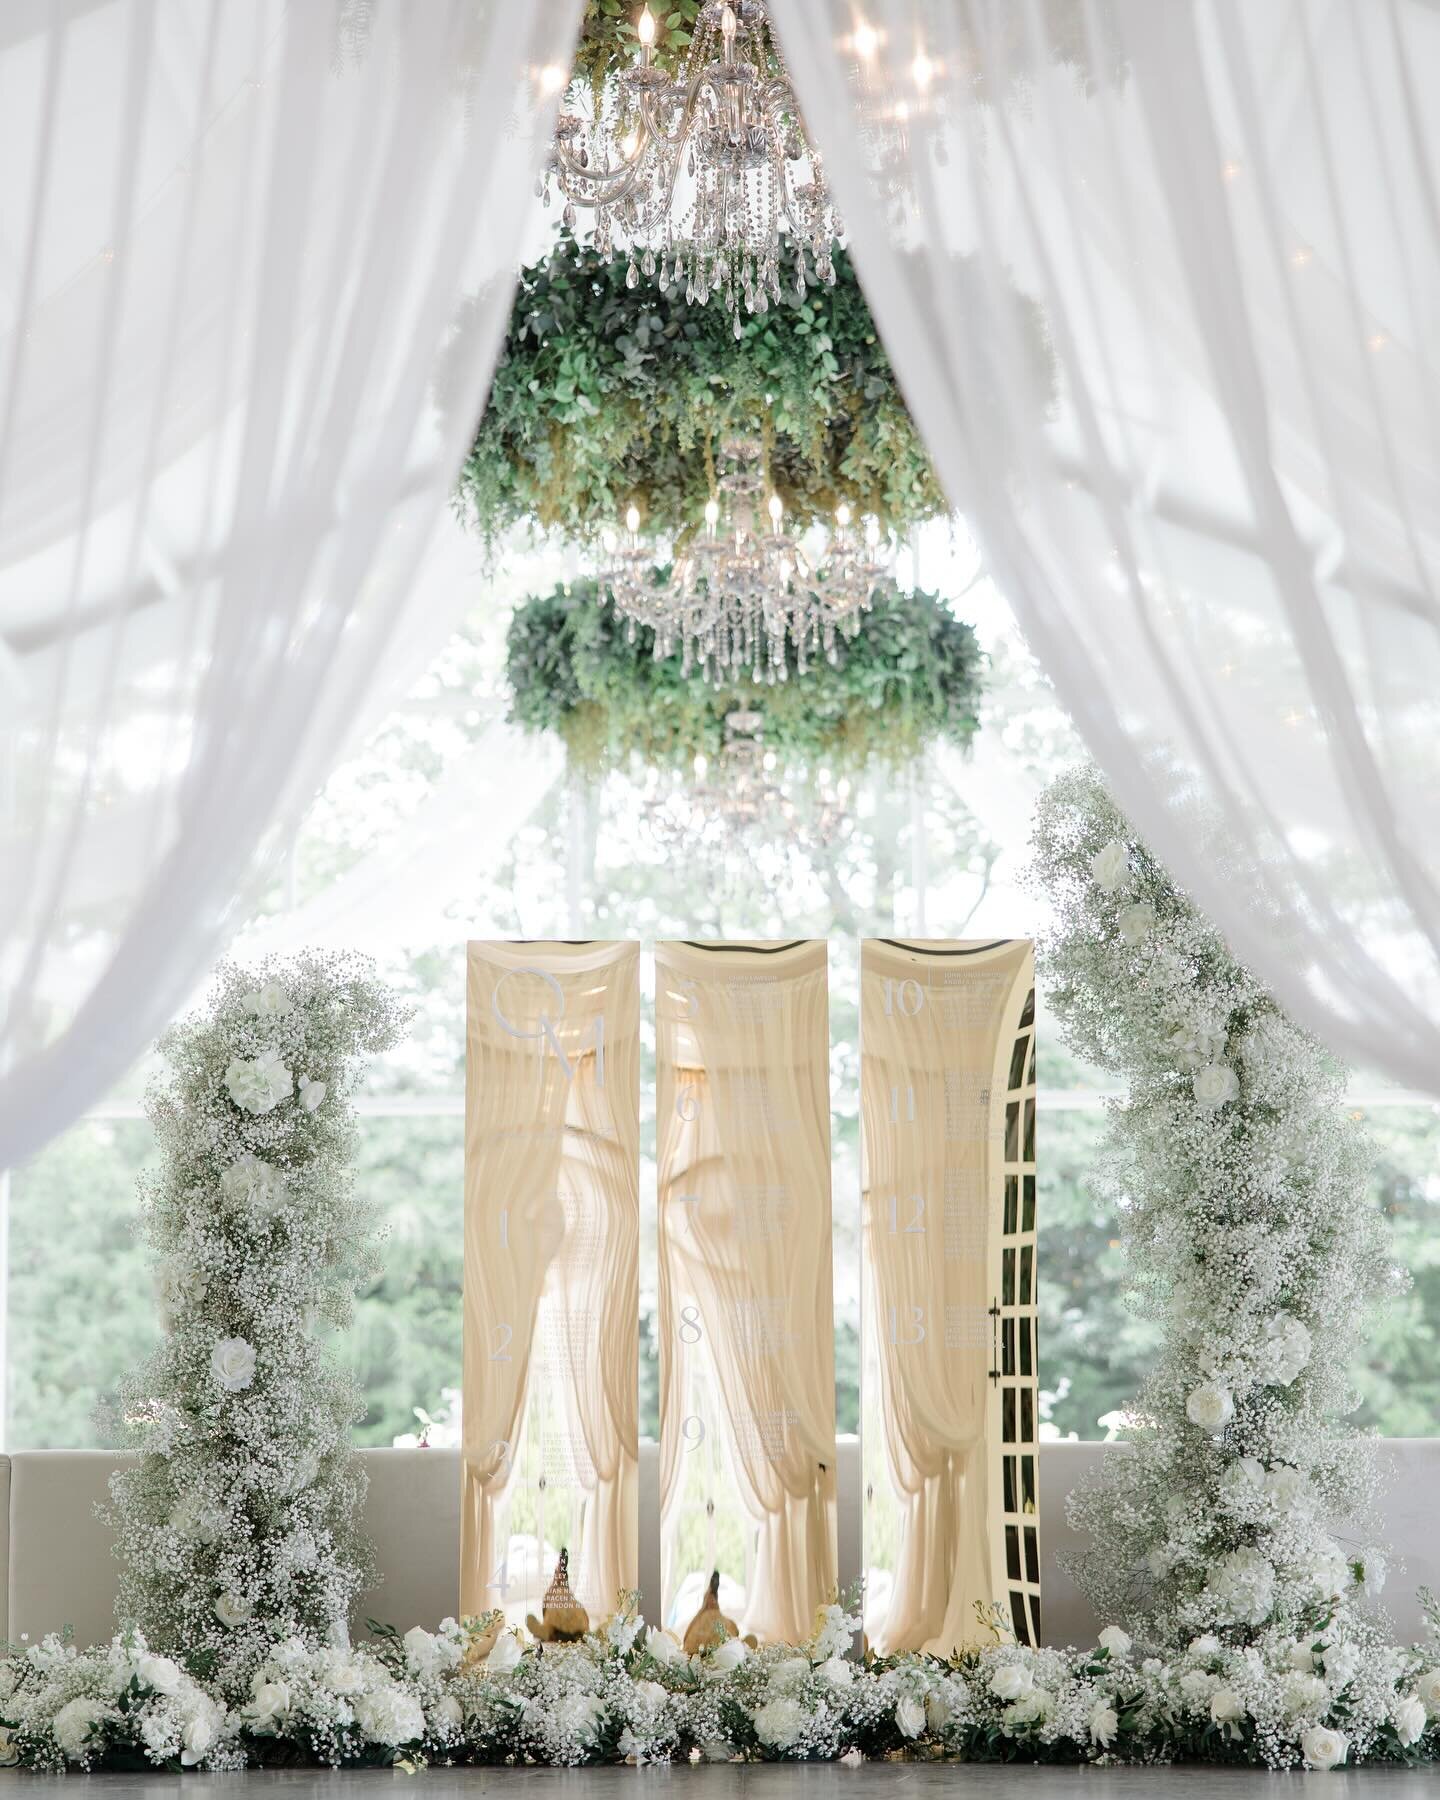 Happy Thursday, friends!! ✌🏼 What a way to make a grand entrance, am I right?? Olivia had such a beautiful vision in mind and these superstar vendors really made it look MAGICAL 🫶🏼

The back of this seating chart also served as a backdrop for the 